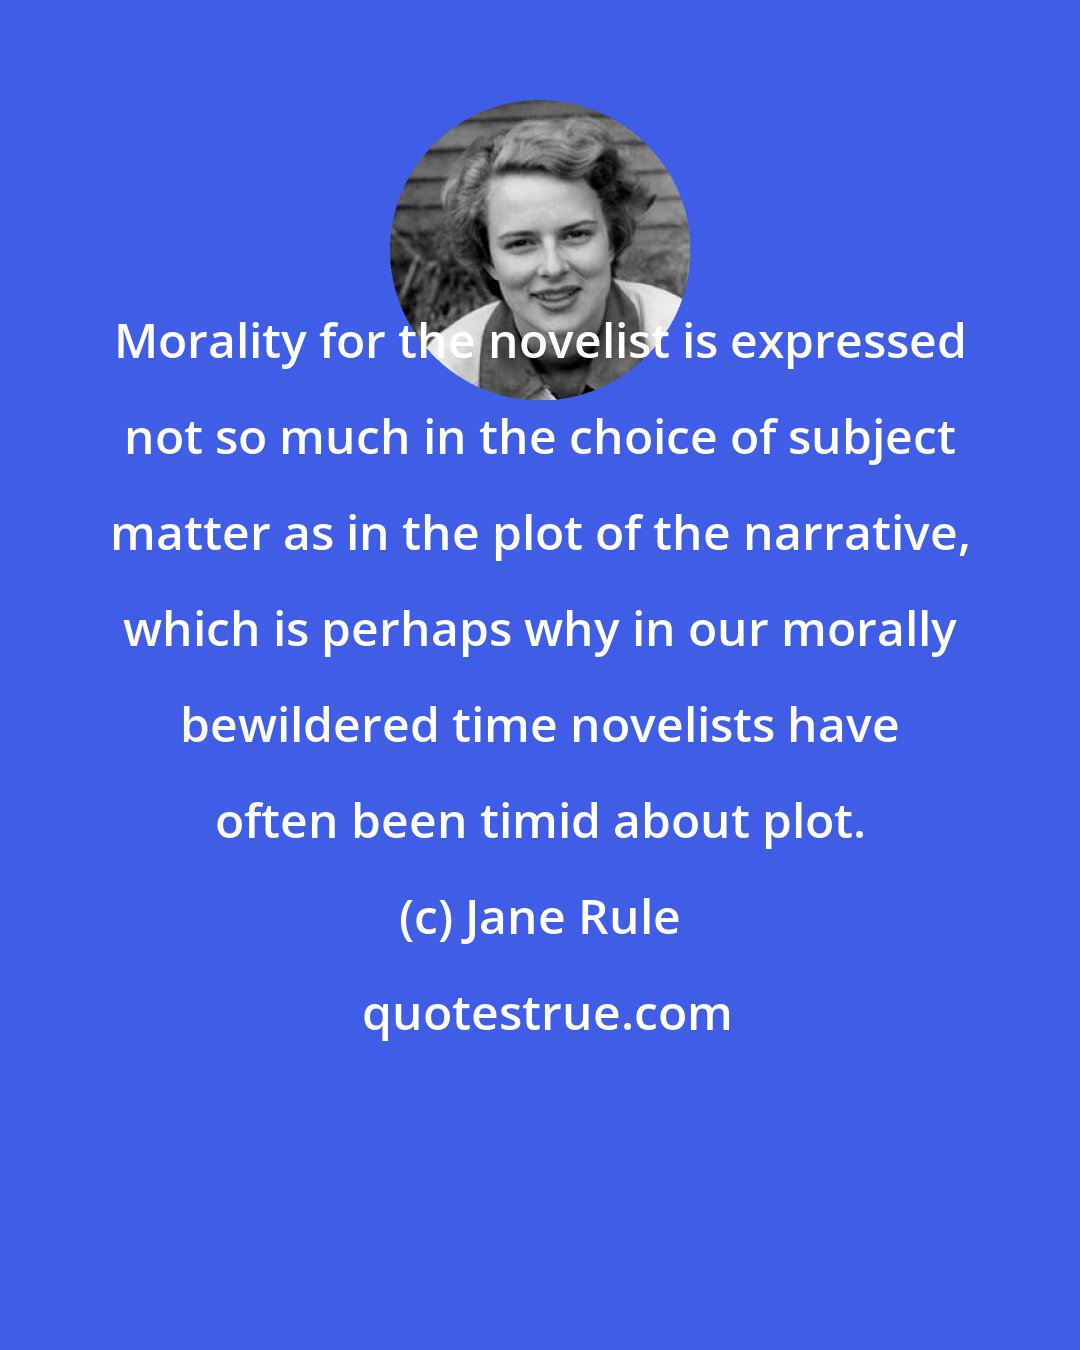 Jane Rule: Morality for the novelist is expressed not so much in the choice of subject matter as in the plot of the narrative, which is perhaps why in our morally bewildered time novelists have often been timid about plot.